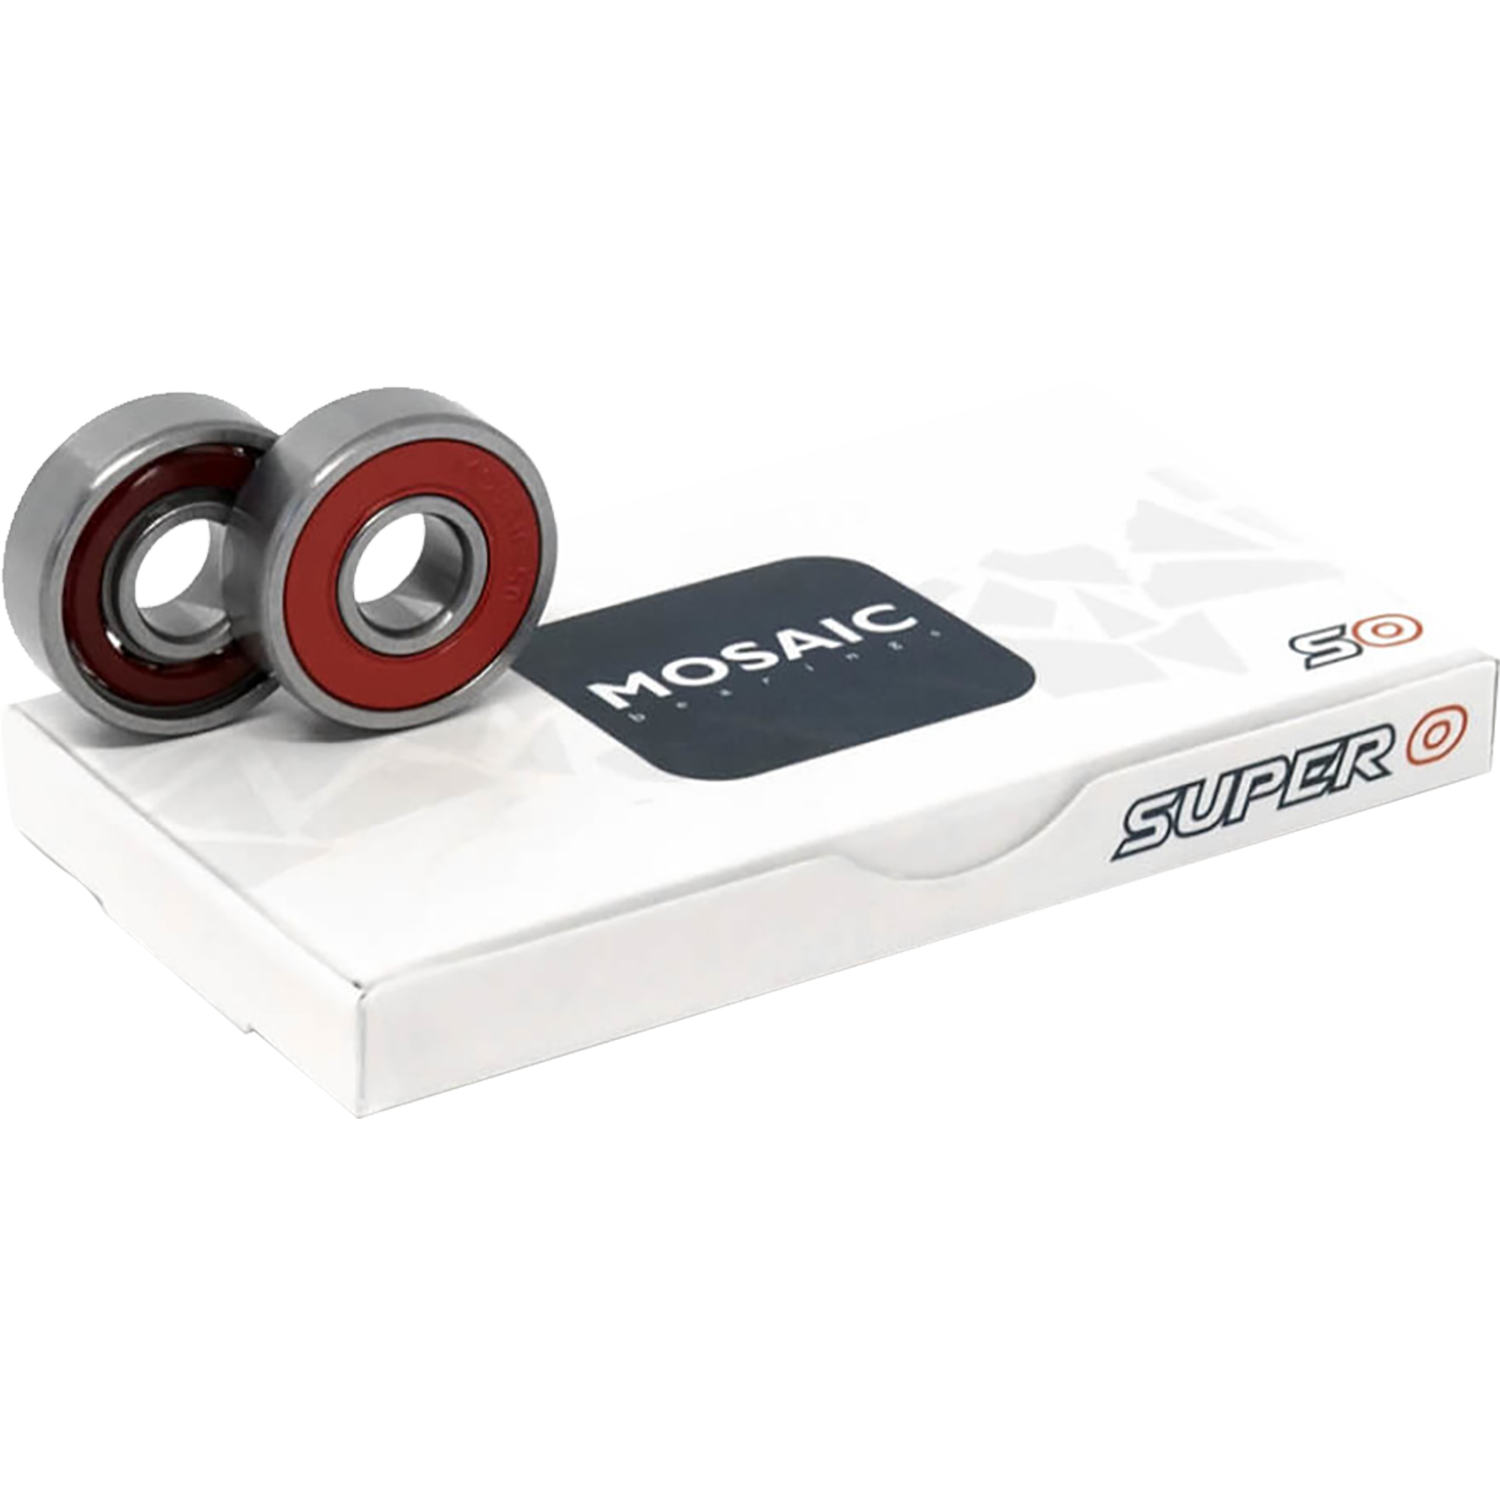 Mosaic Super 0 Abec-5 Bearings Silver/Red Single Set - 8 Pieces